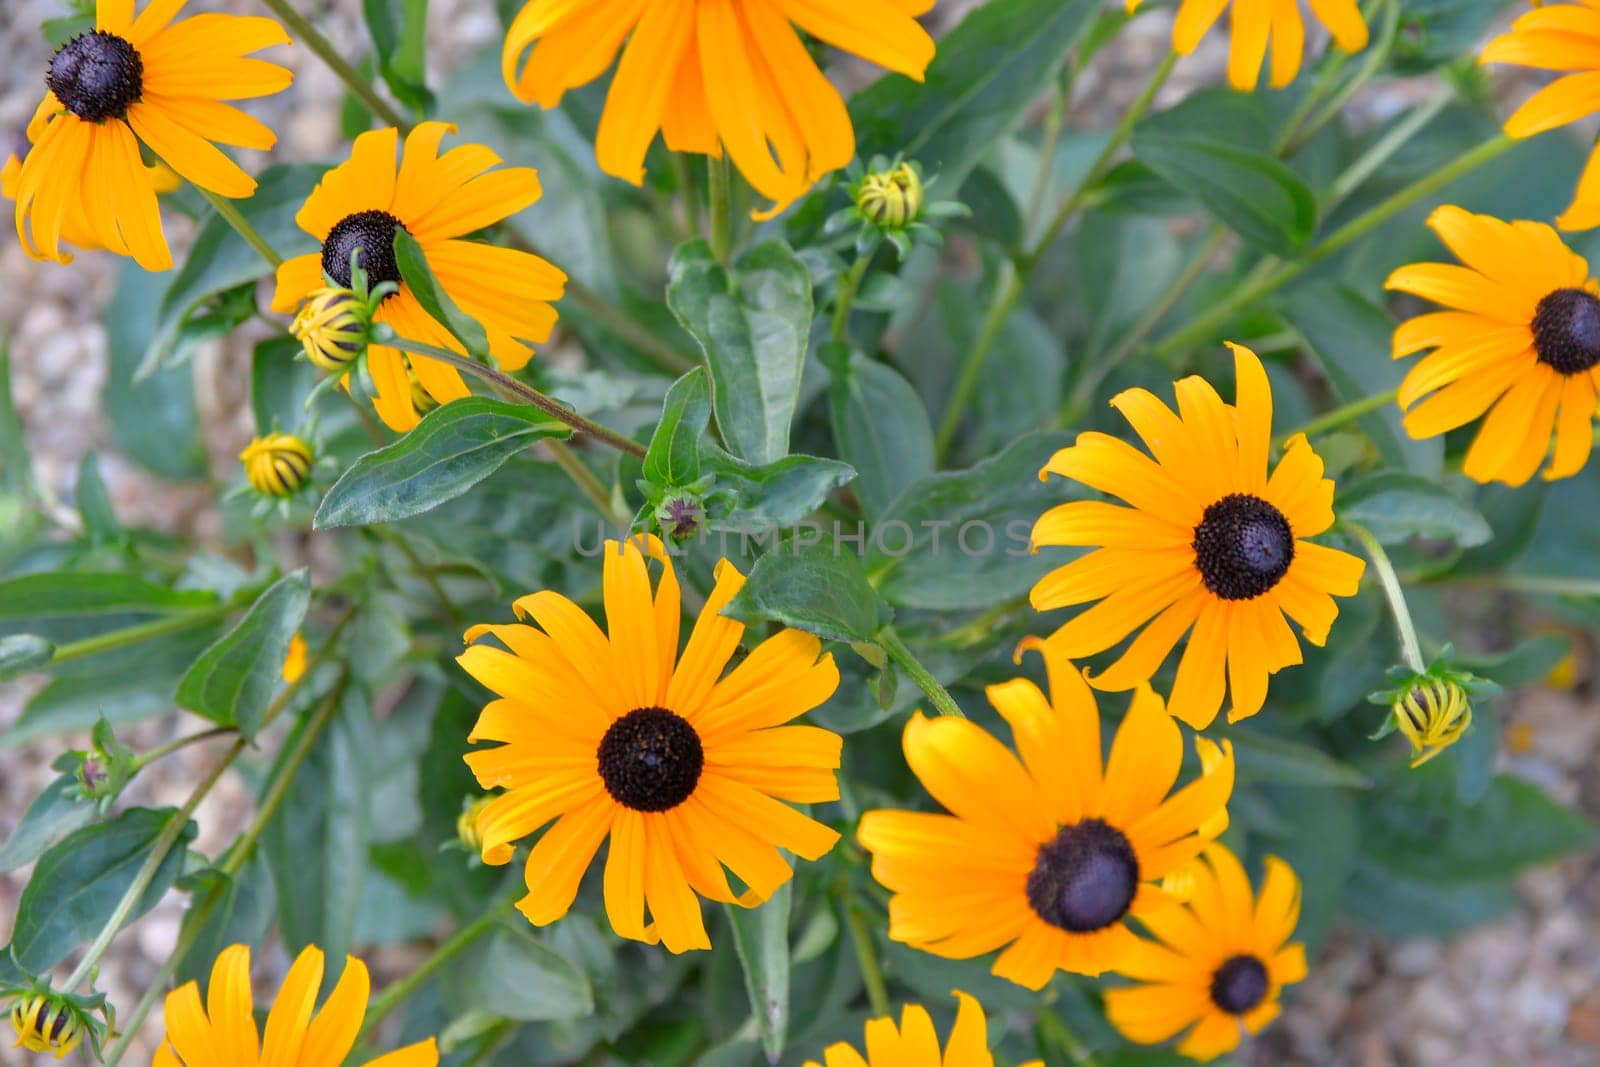 Rudbeckia plants, the Asteraceae yellow and brown flowers. Like many plants, they have several common names, among which are: Black-eyed Susan, Gloriosa Daisy, and Yellow Ox Eye by roman_nerud